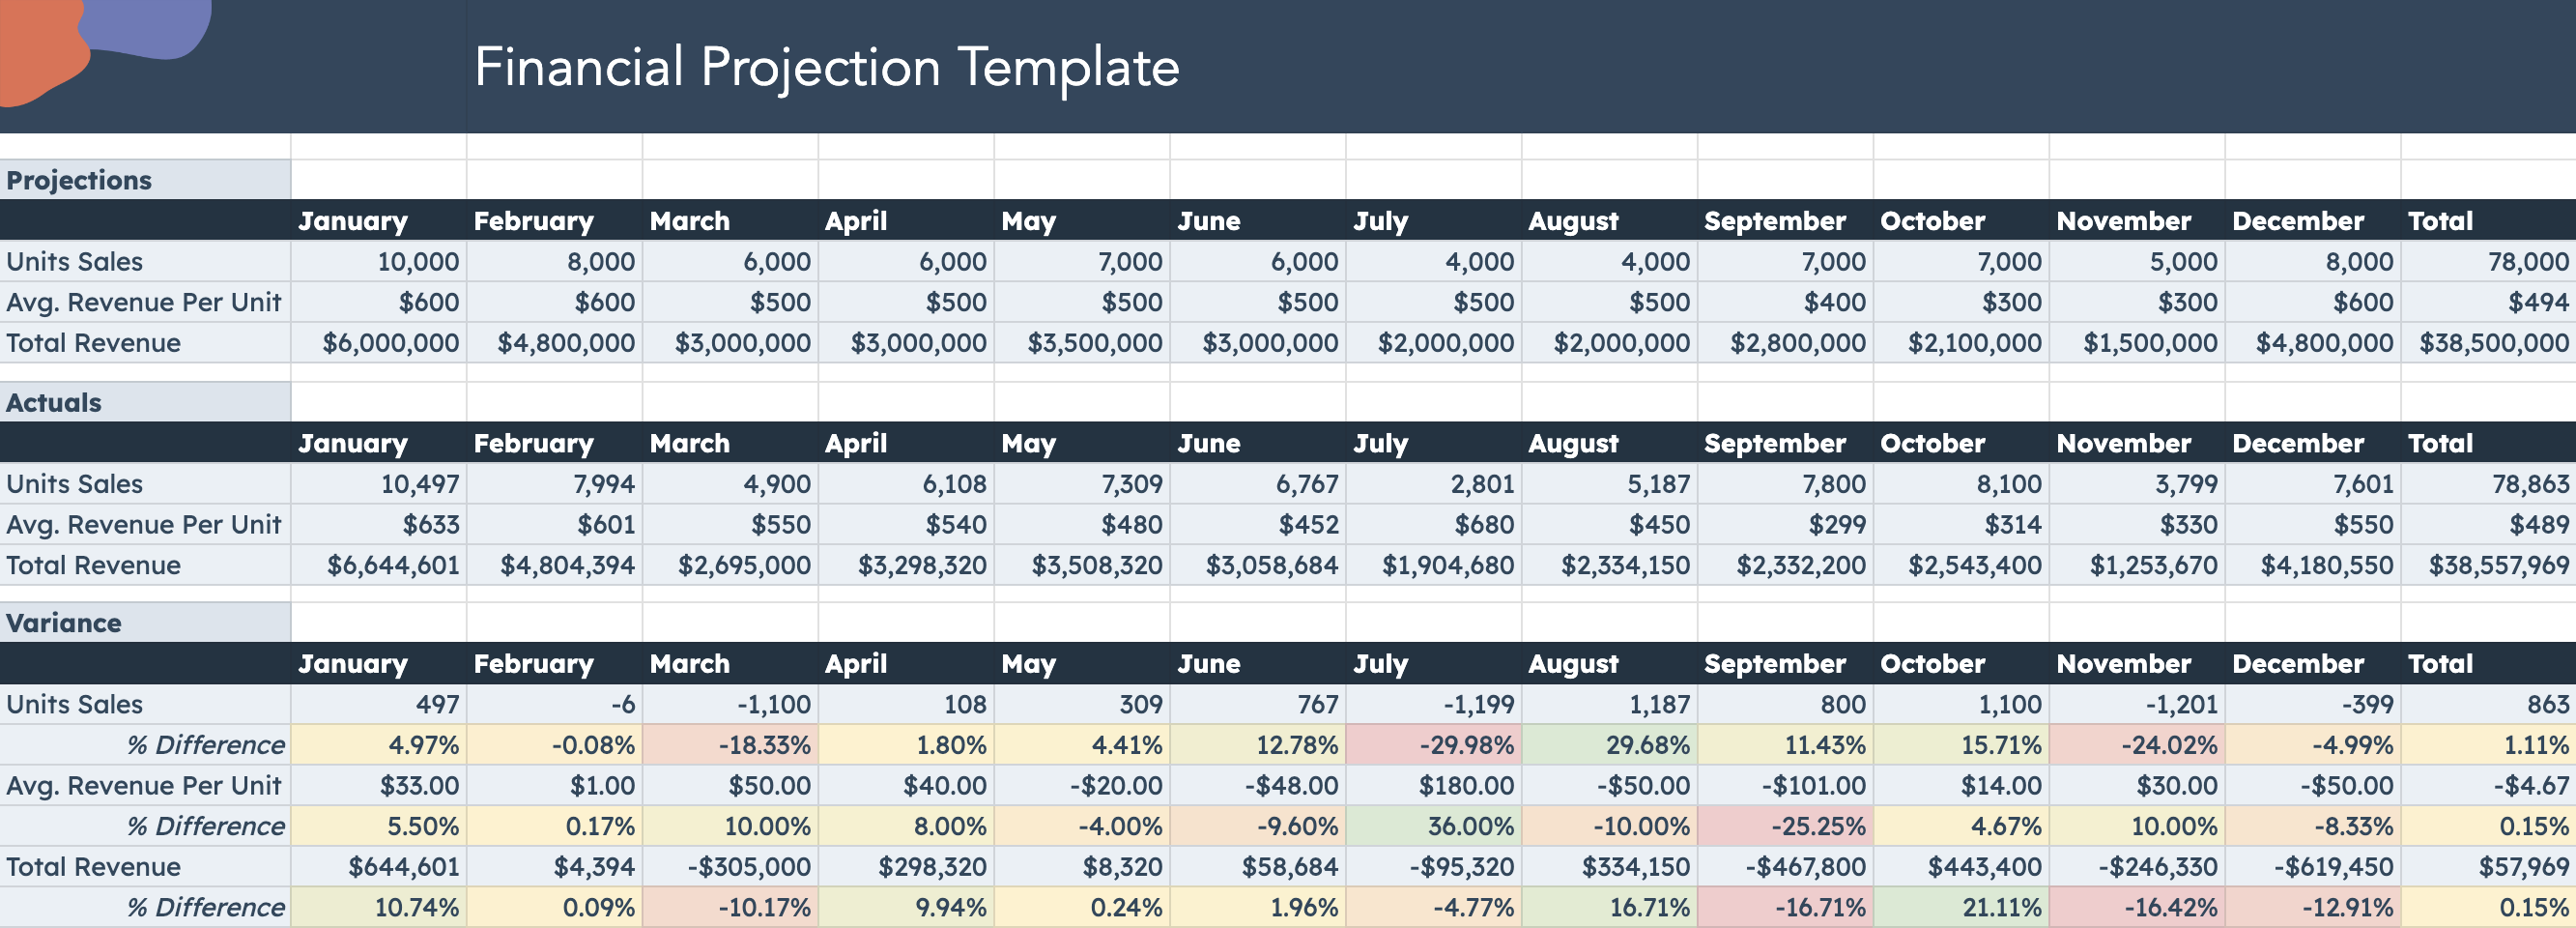 financial projection template